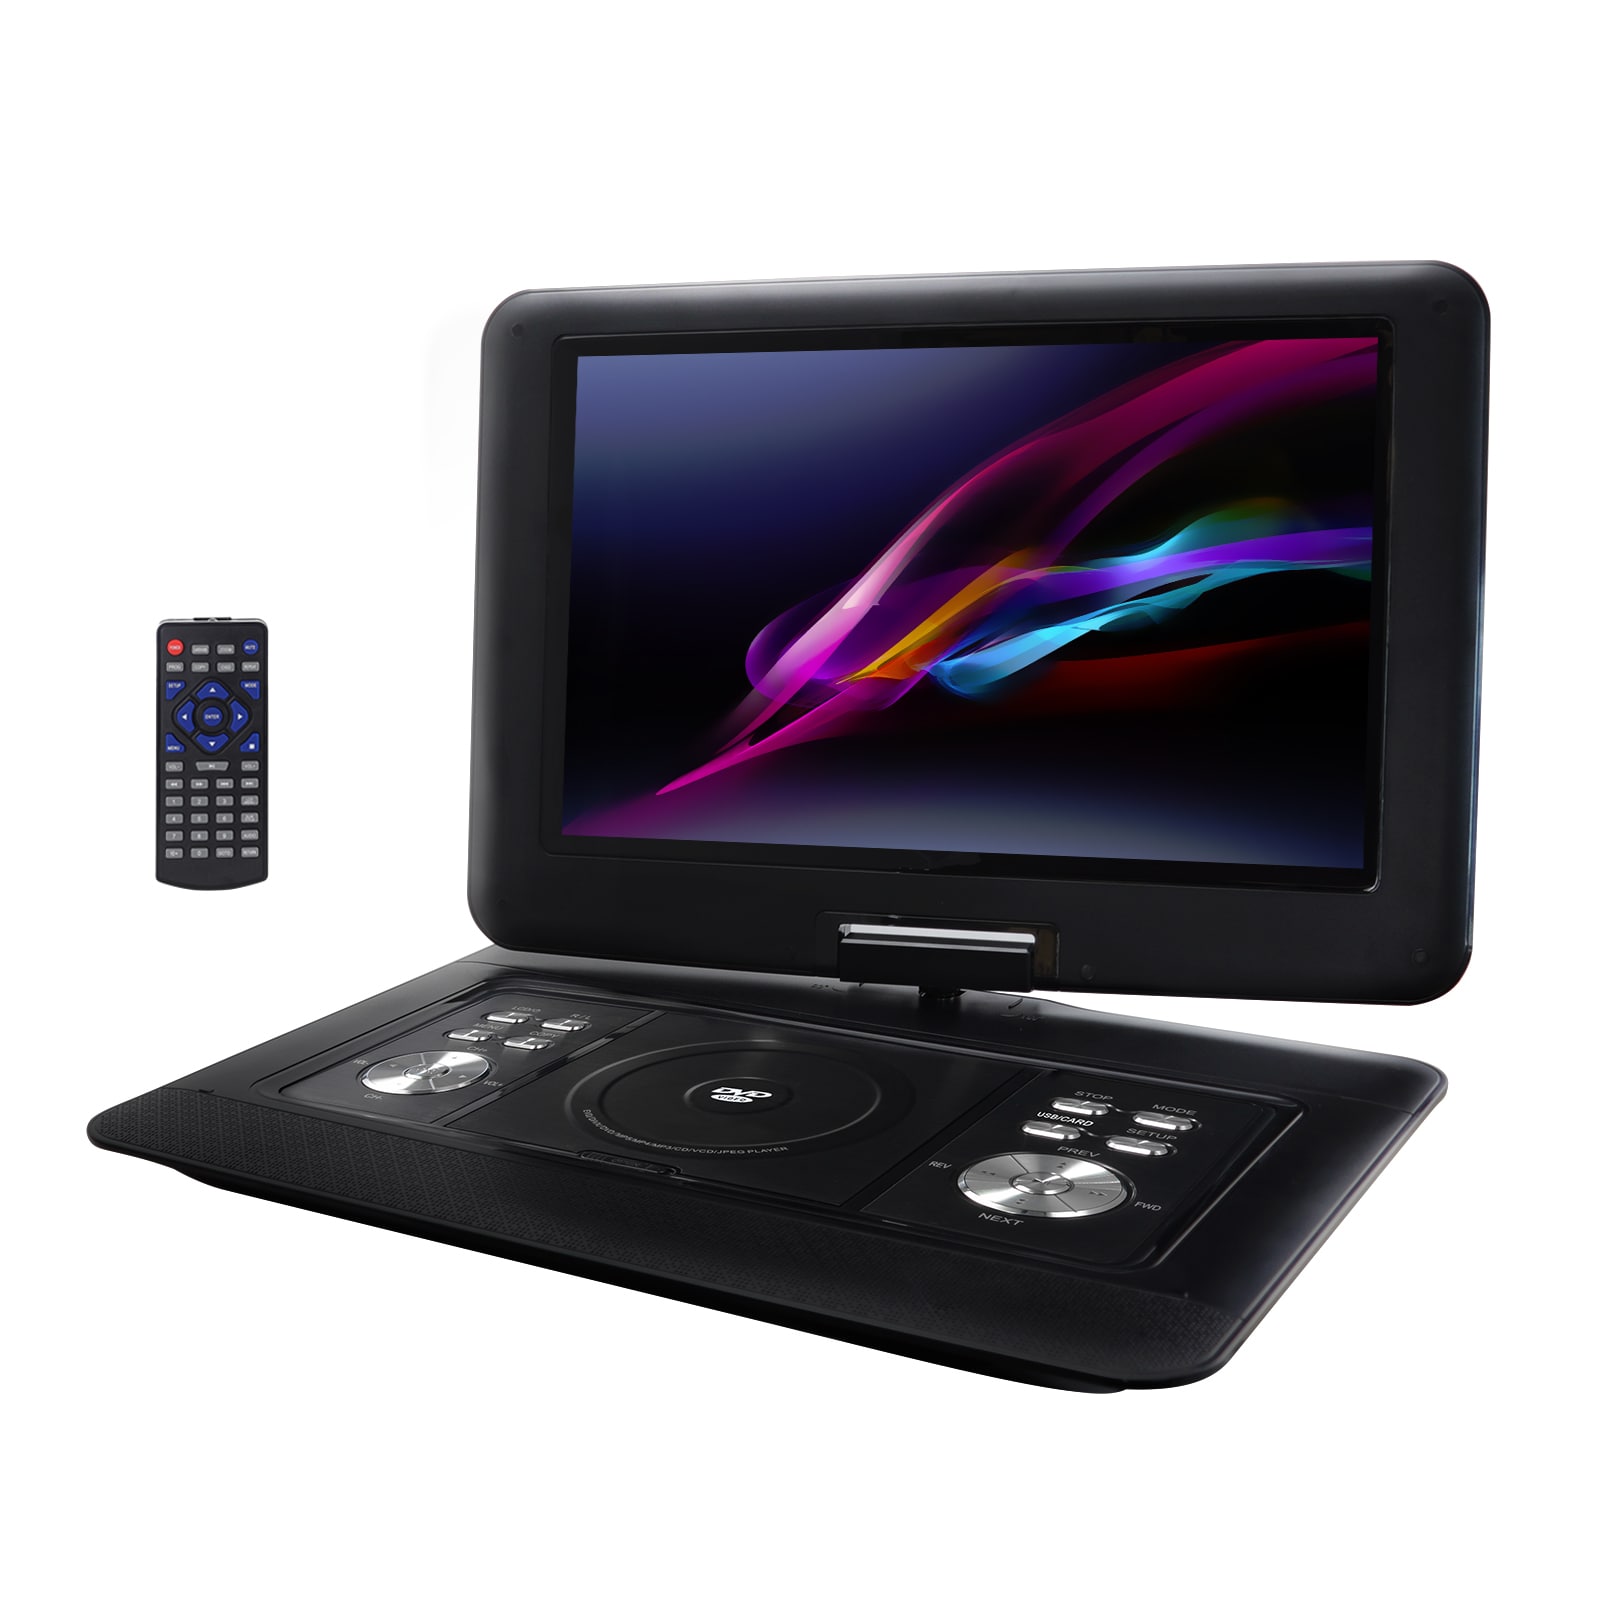 Trexonic Shop the Trexonic 14.1-in Portable DVD Player with TFT-LCD Screen and USB/SD/AV Inputs - Black | Portable Video Player with Remote Control -  TRX-1580